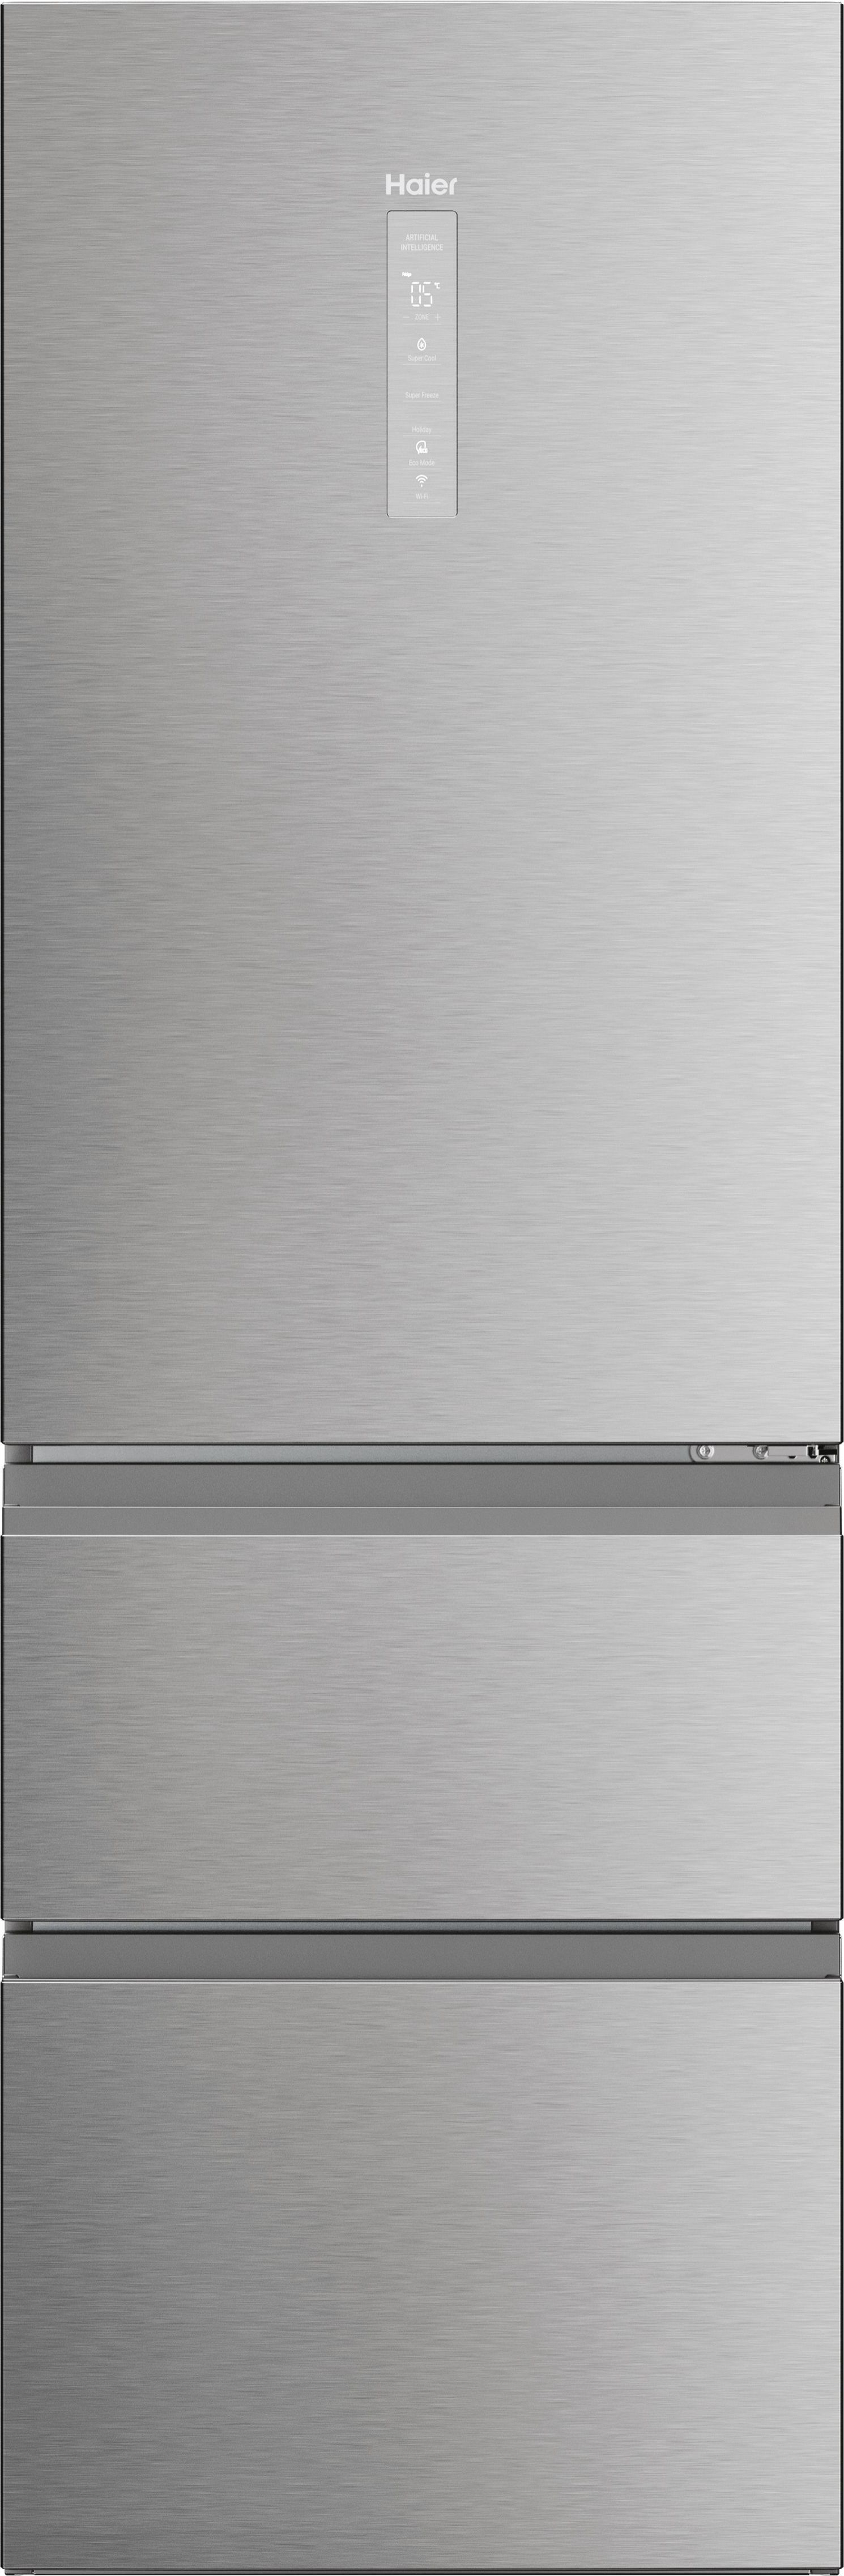 Haier 3D 60 Series 5 HTW5618ENMG Wifi Connected 60/40 No Frost Fridge Freezer - Stainless Steel - E Rated, Stainless Steel